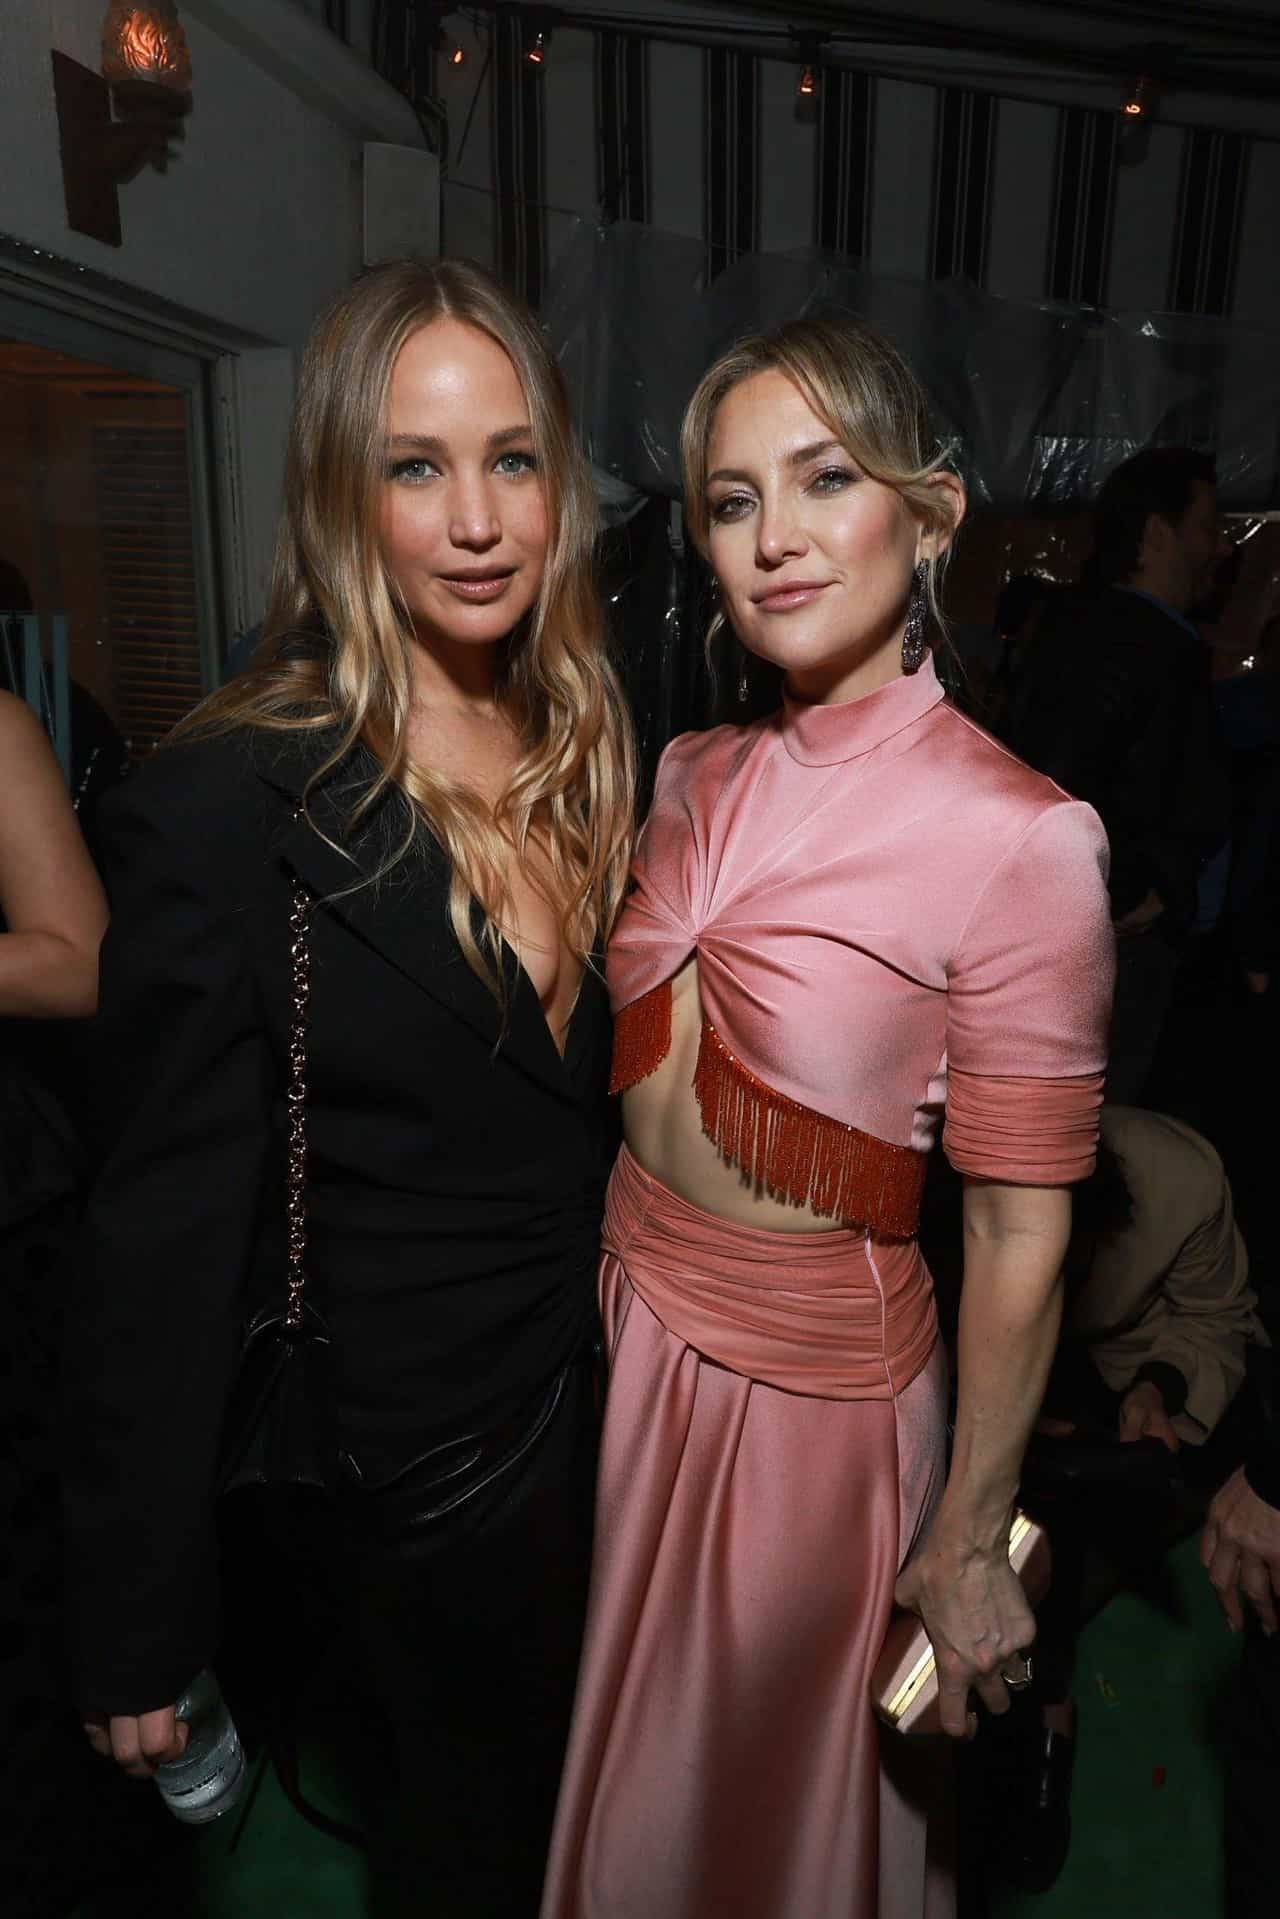 Jennifer Lawrence Turns Up the Heat at W Magazine's Annual Party